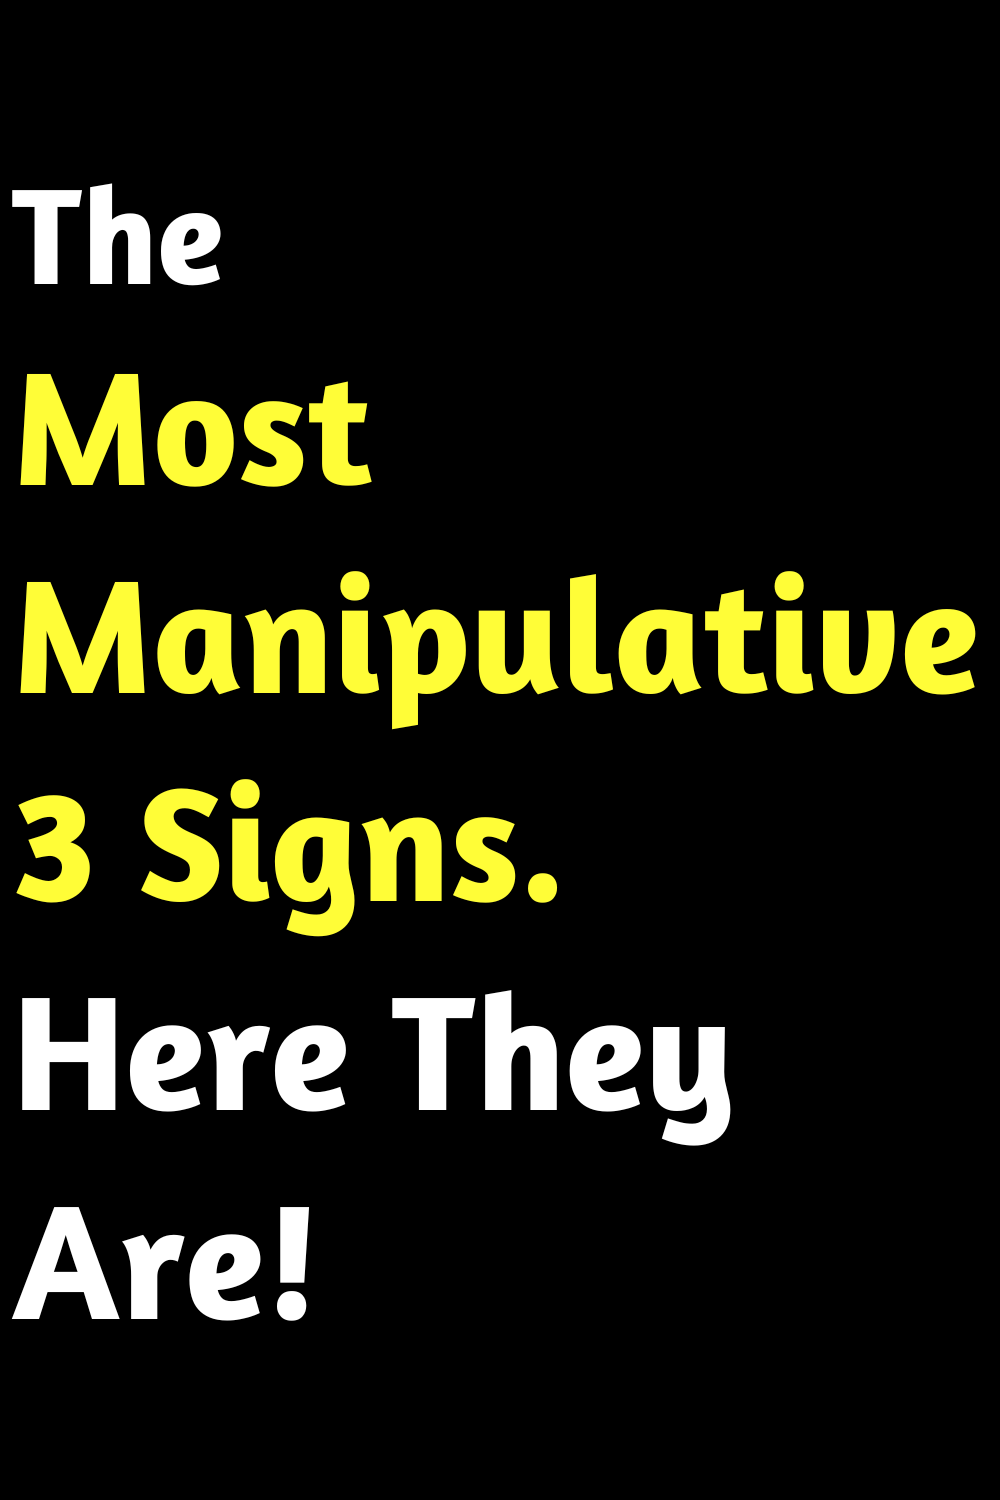 The Most Manipulative 3 Signs. Here They Are!